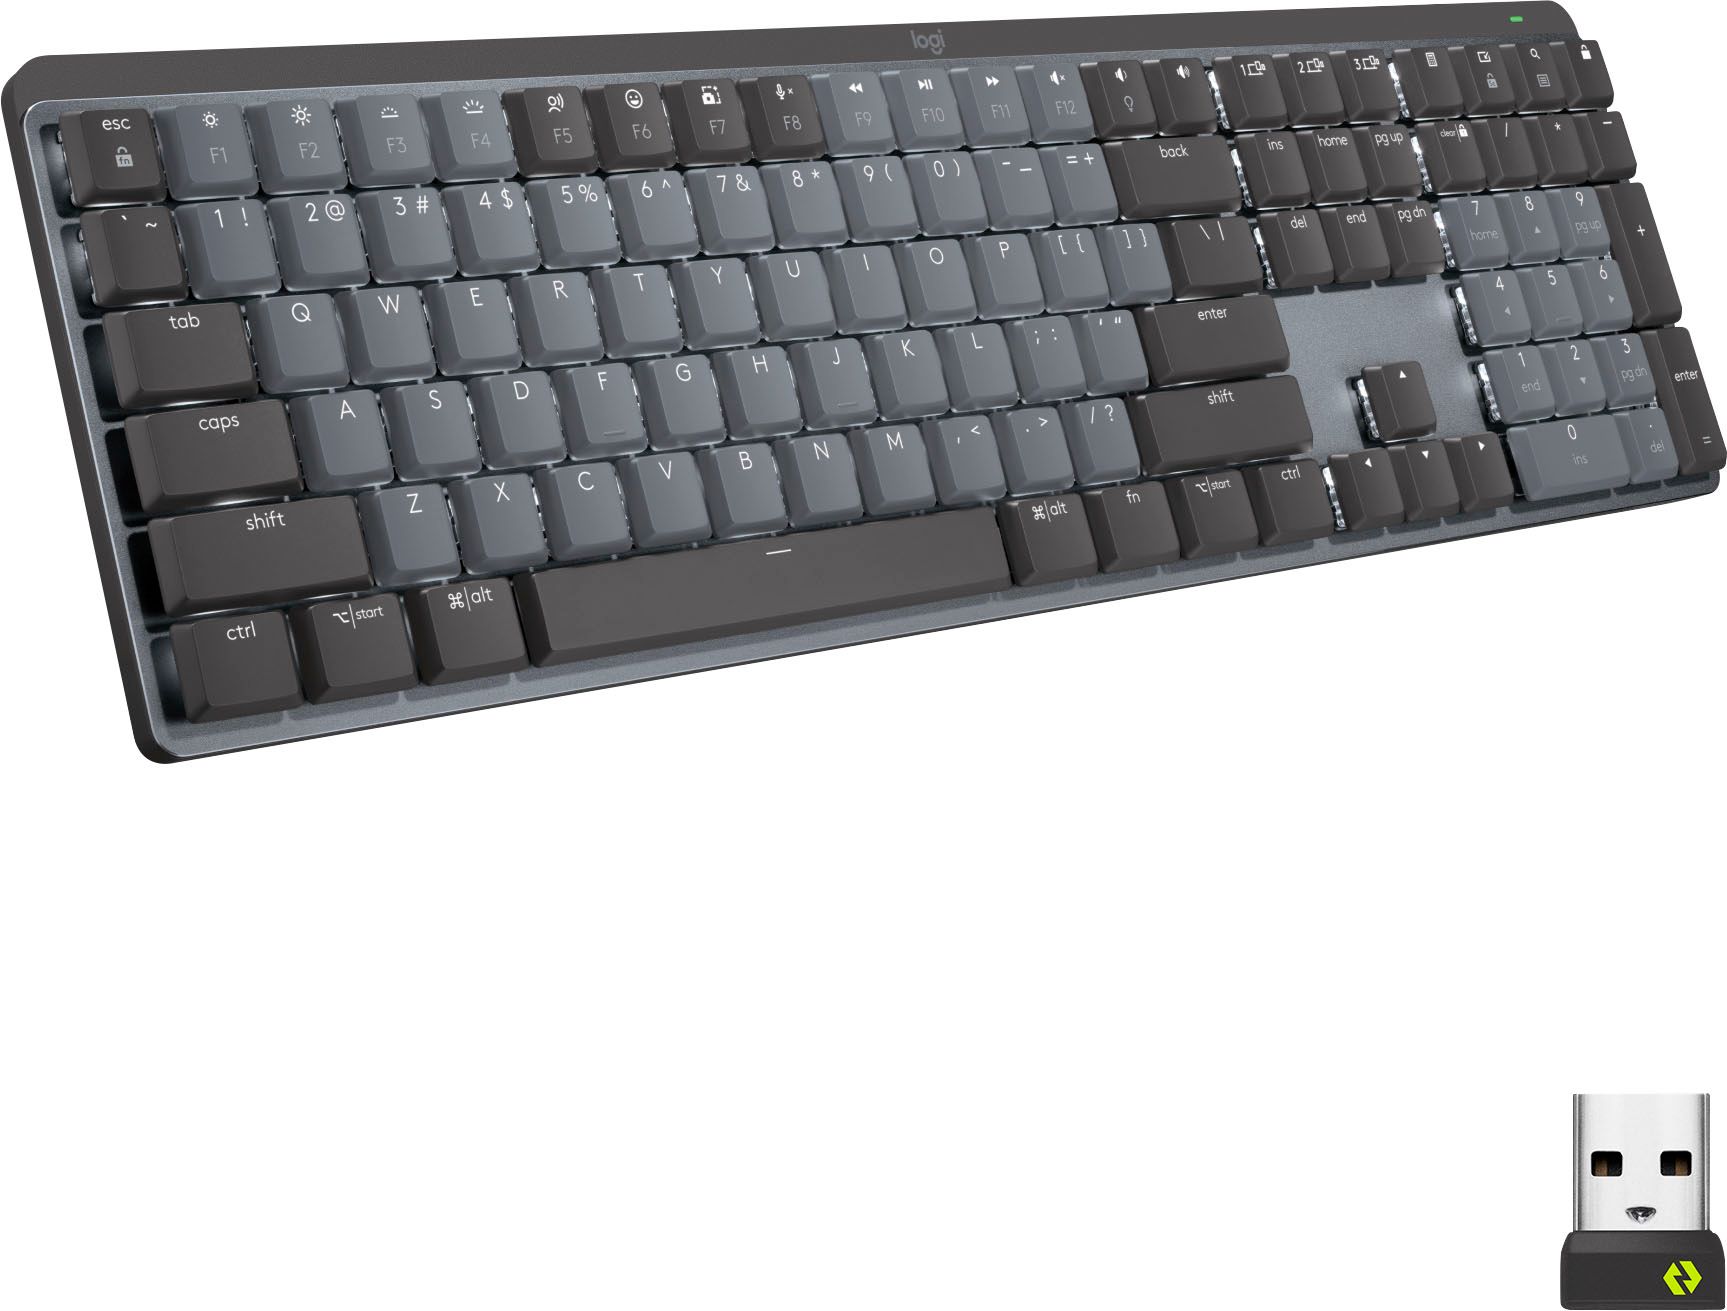 Logitech MX Mechanical Full size Wireless Mechanical Tactile Switch Keyboard for Windows/macOS with Backlit Keys Graphite 920-010547 - Best Buy $156.99